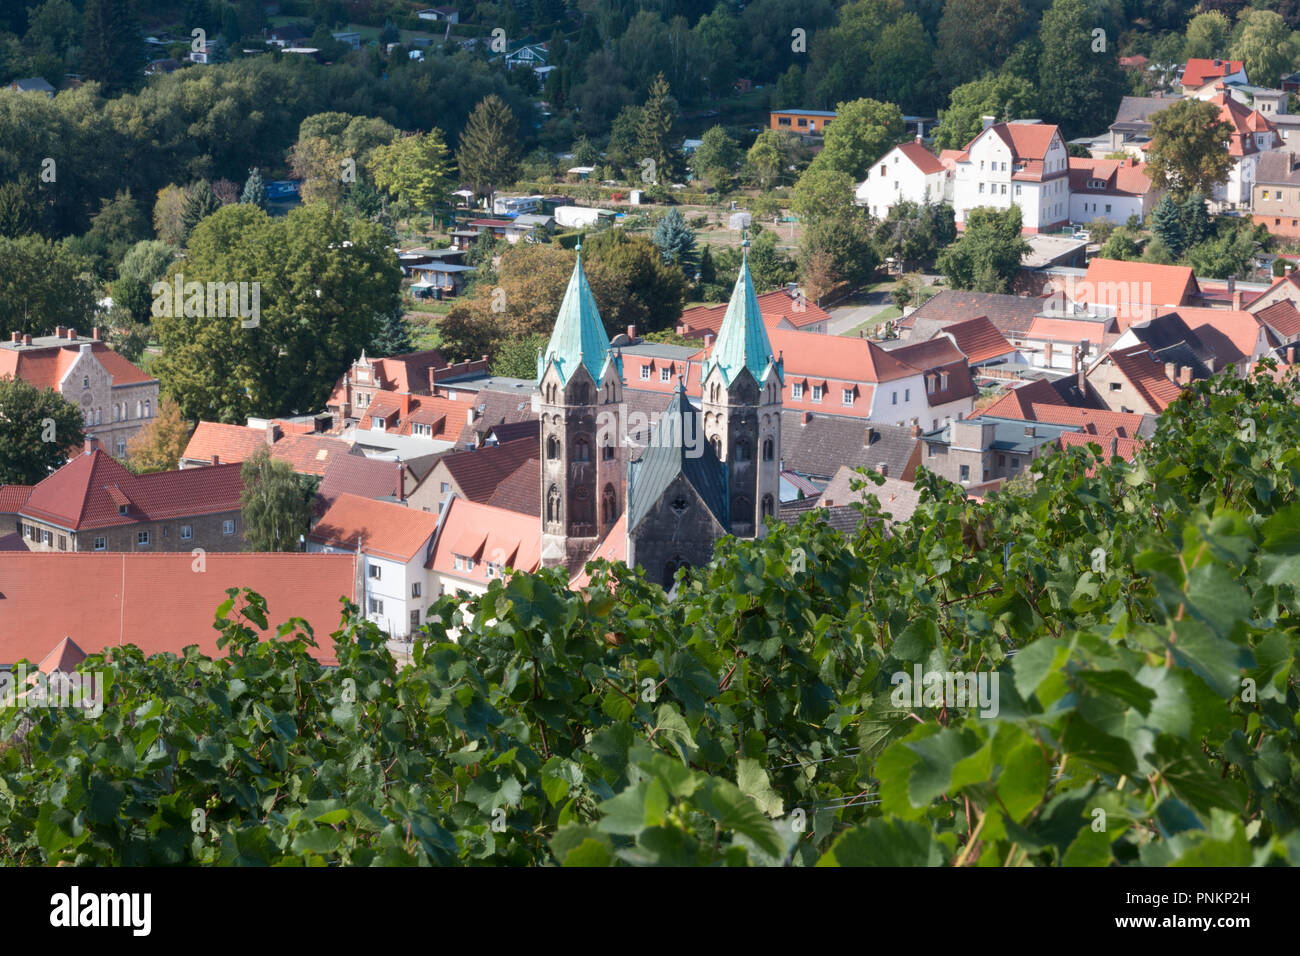 Freyburg, Germany - September 15, 2018: View of a vineyard with vines. , Germany - September 15, 2018: View of the church St. Marien in the wine-growi Stock Photo